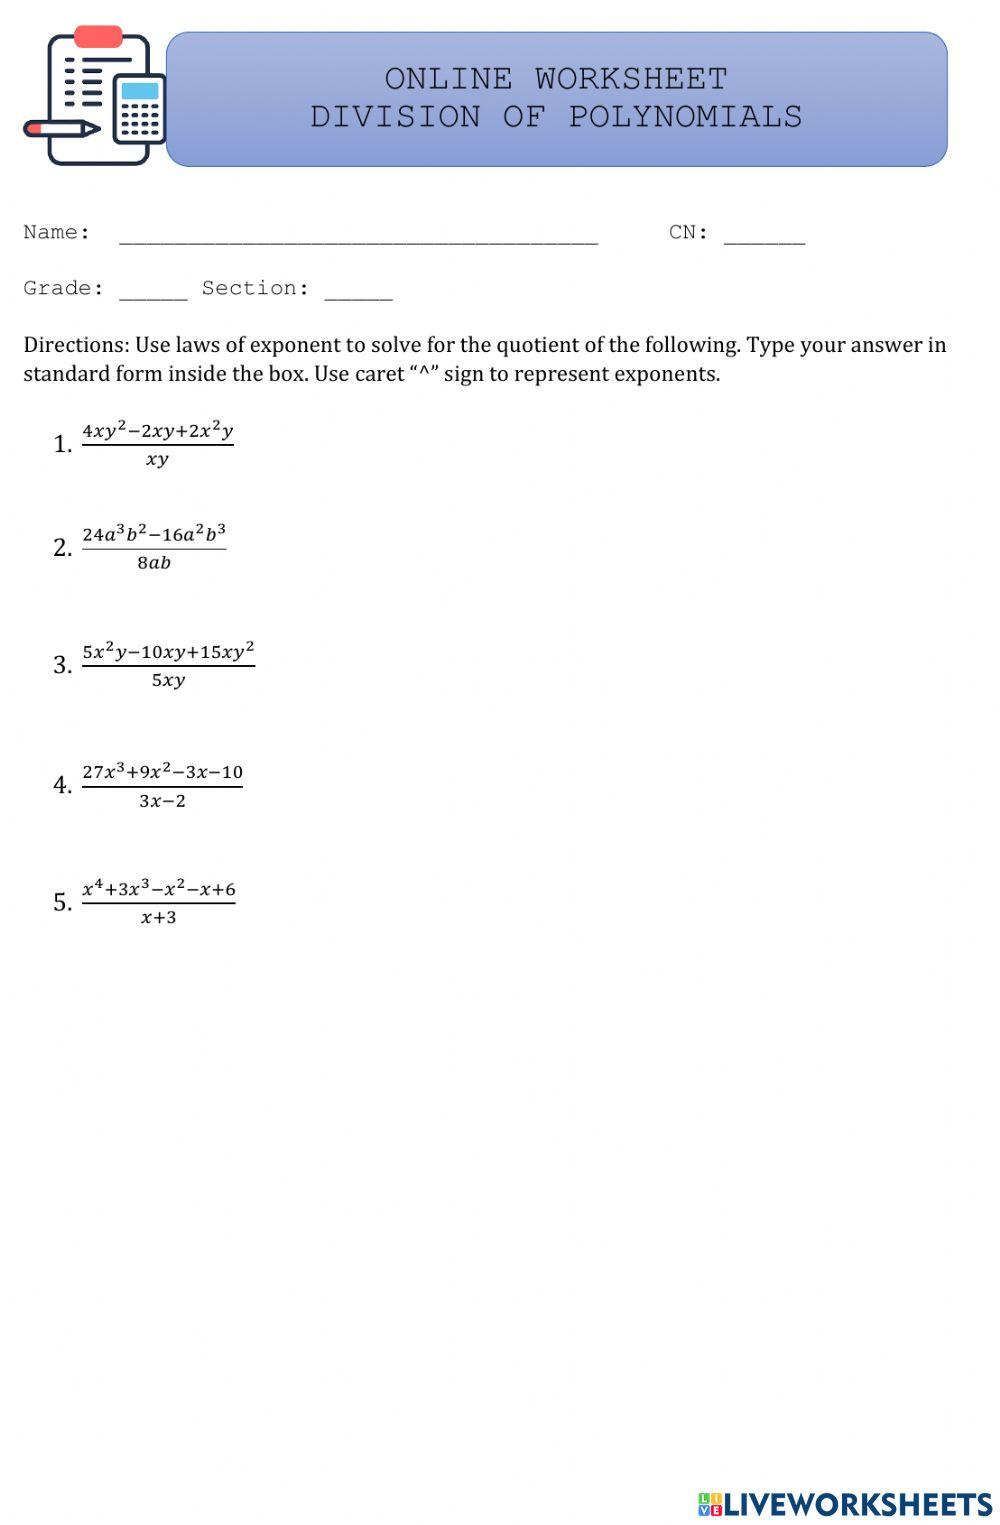 Online Worksheet (Division of Polynomials)